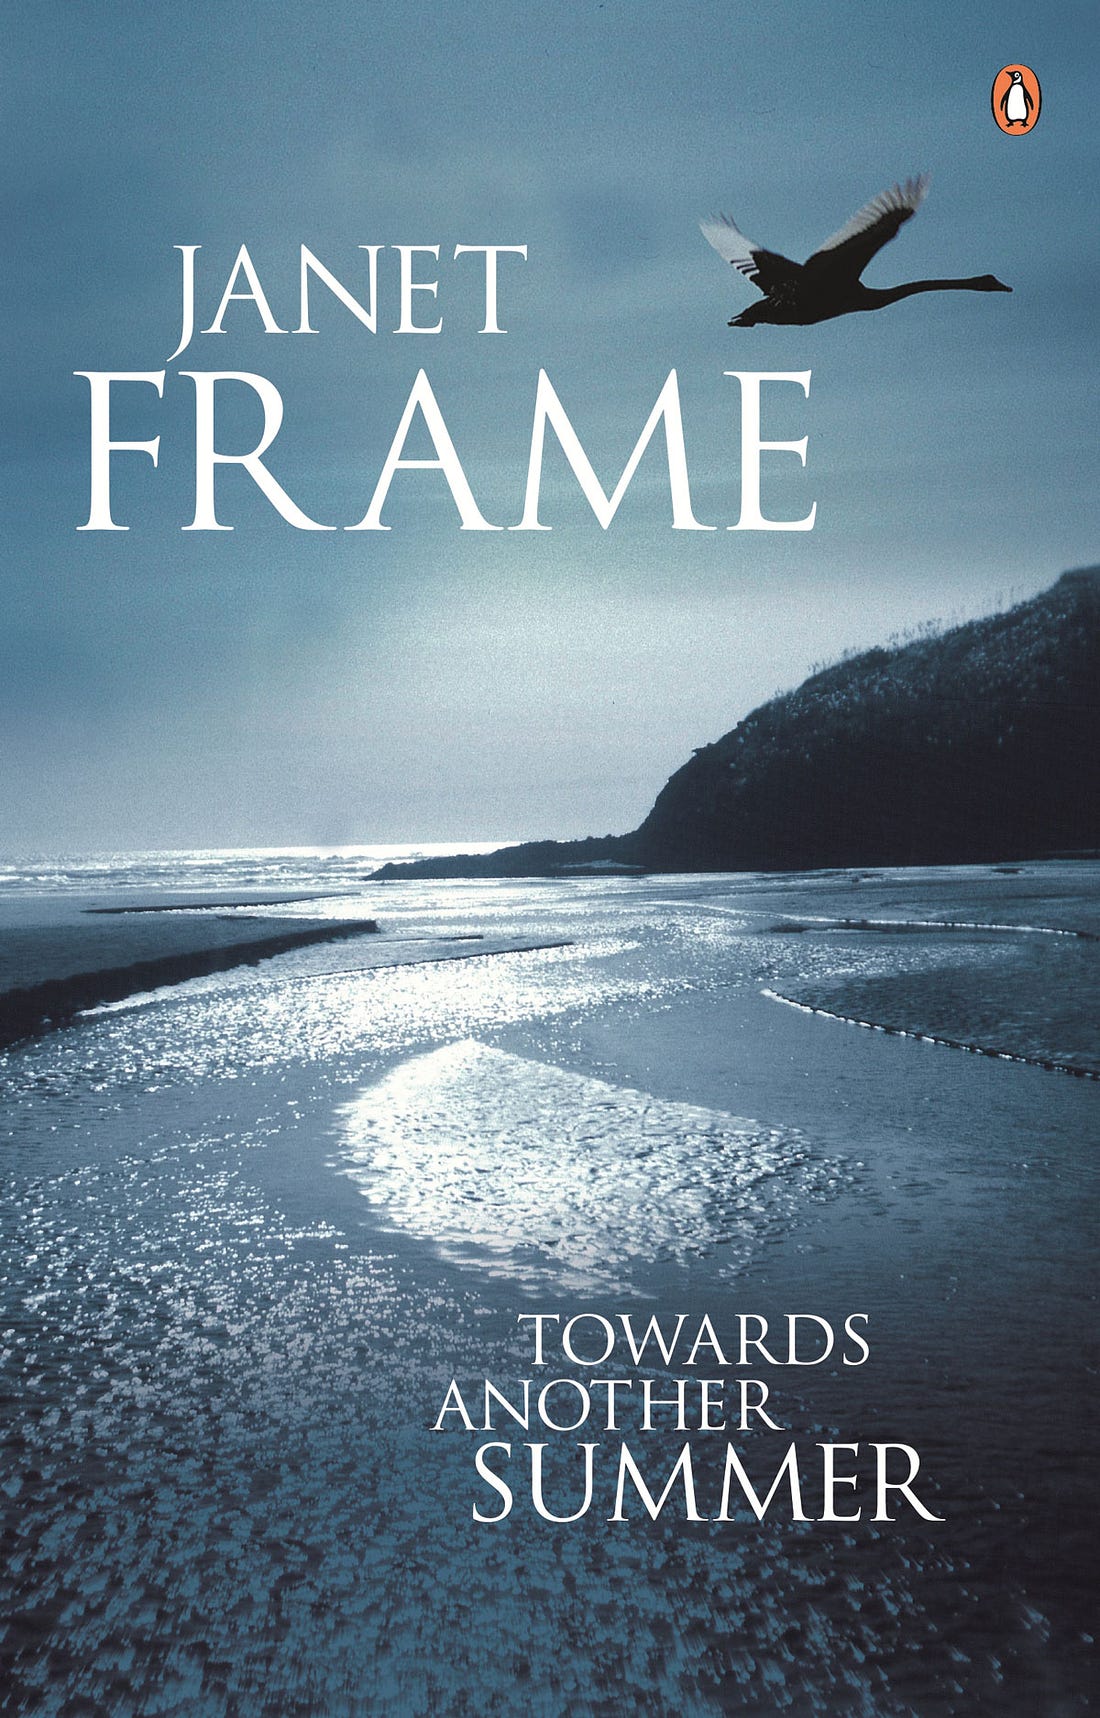 Towards Another Summer (by Janet Frame) Book Cover